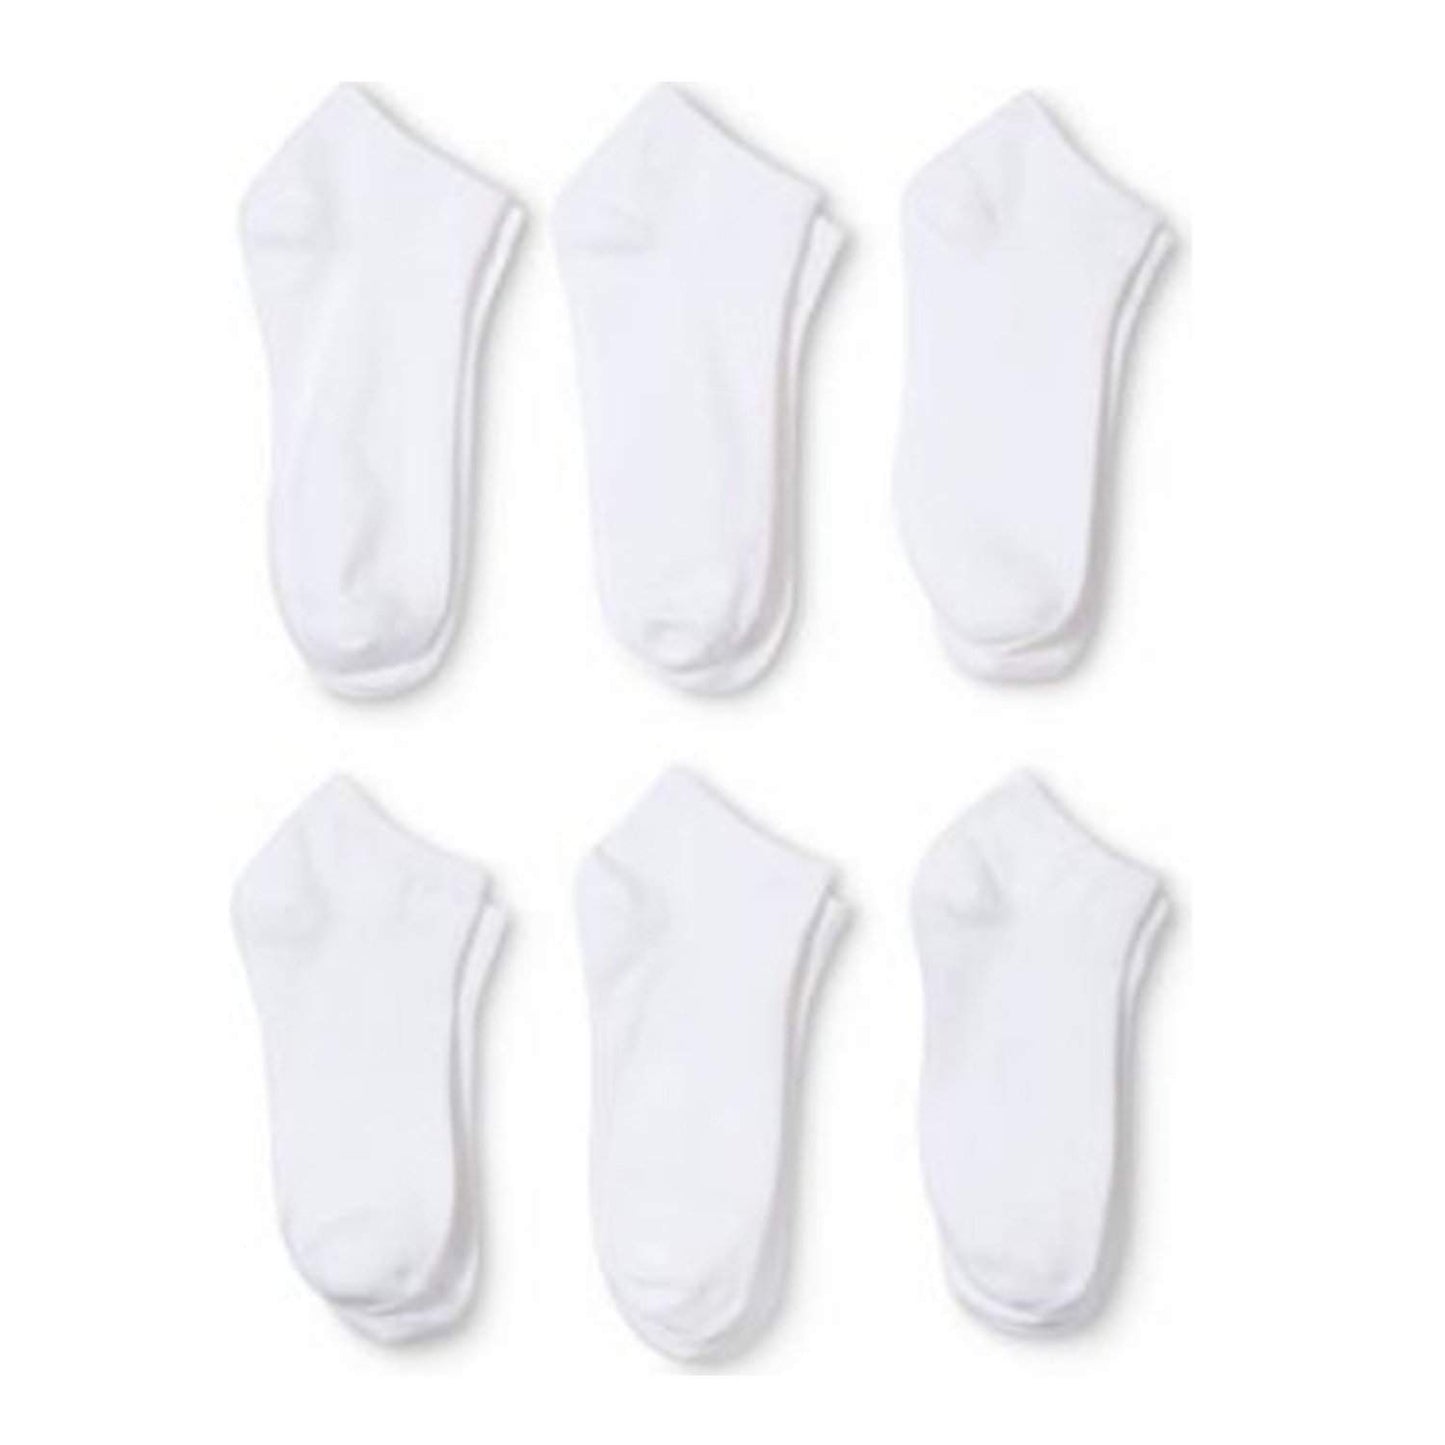 50 Pairs Women's Ankle No Show Socks - Polyester and Spandex - Bulk Wholesale